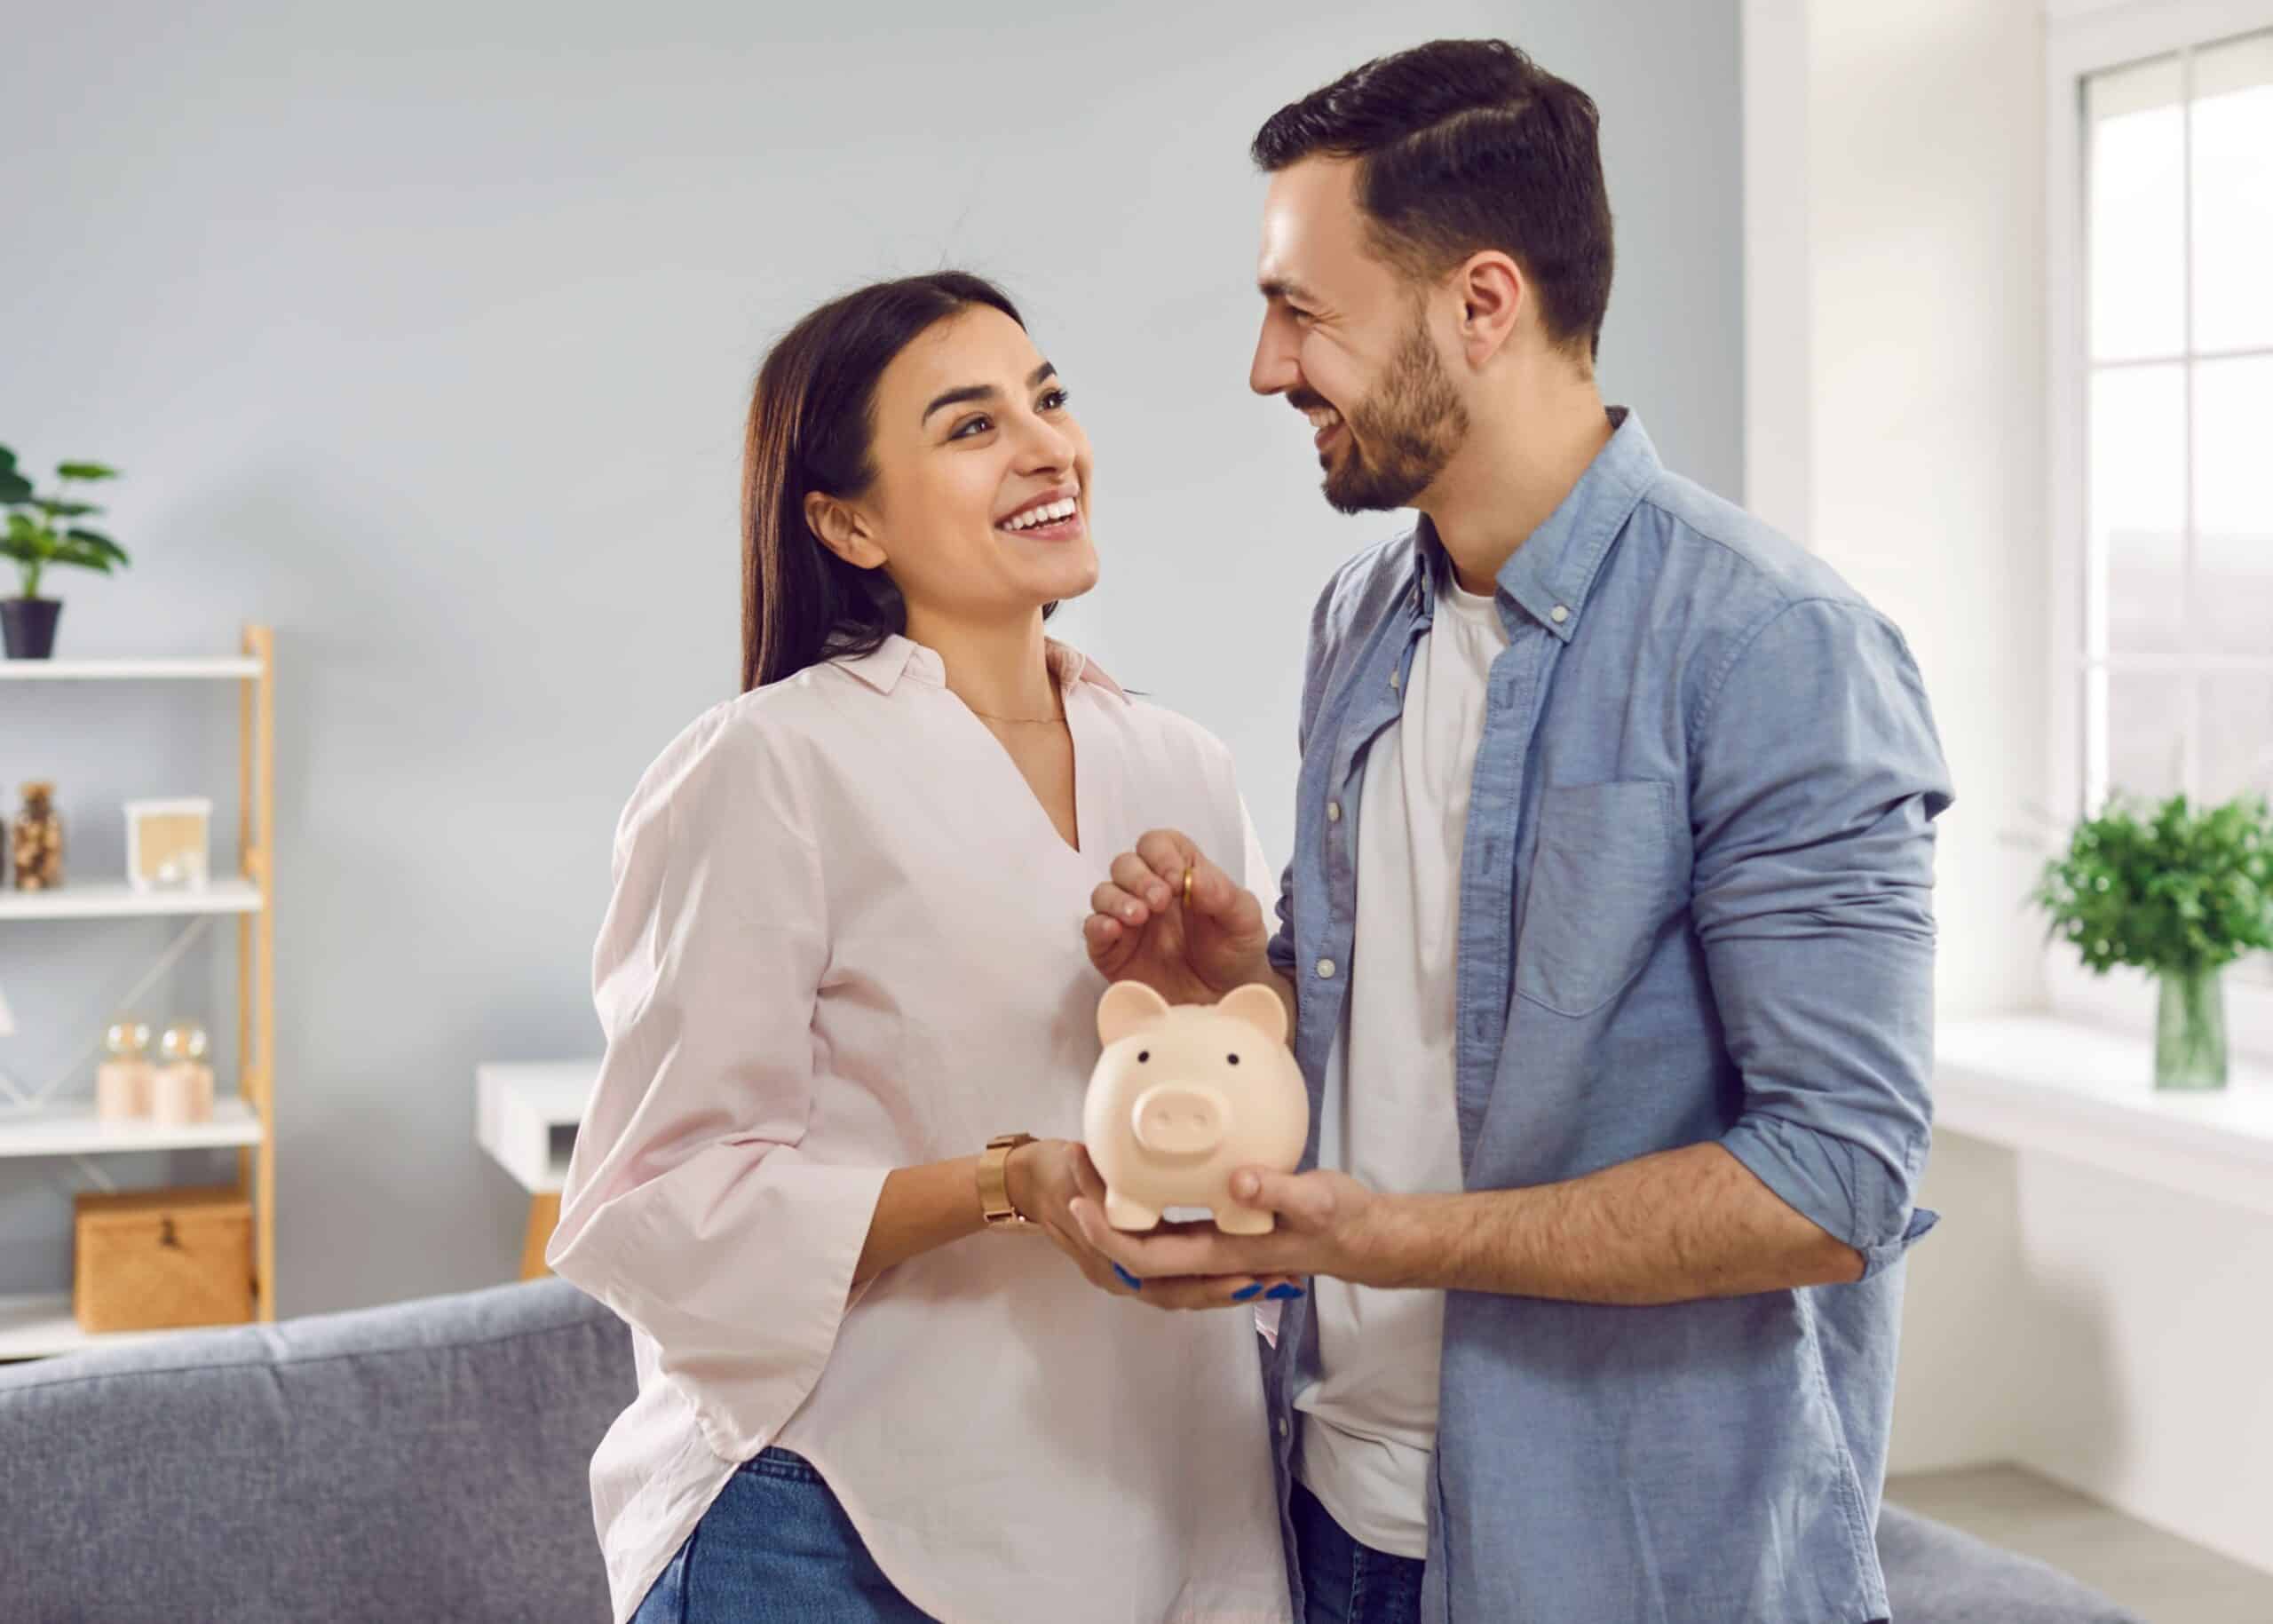 Couple smiling and happy about their savings from a rebate program.